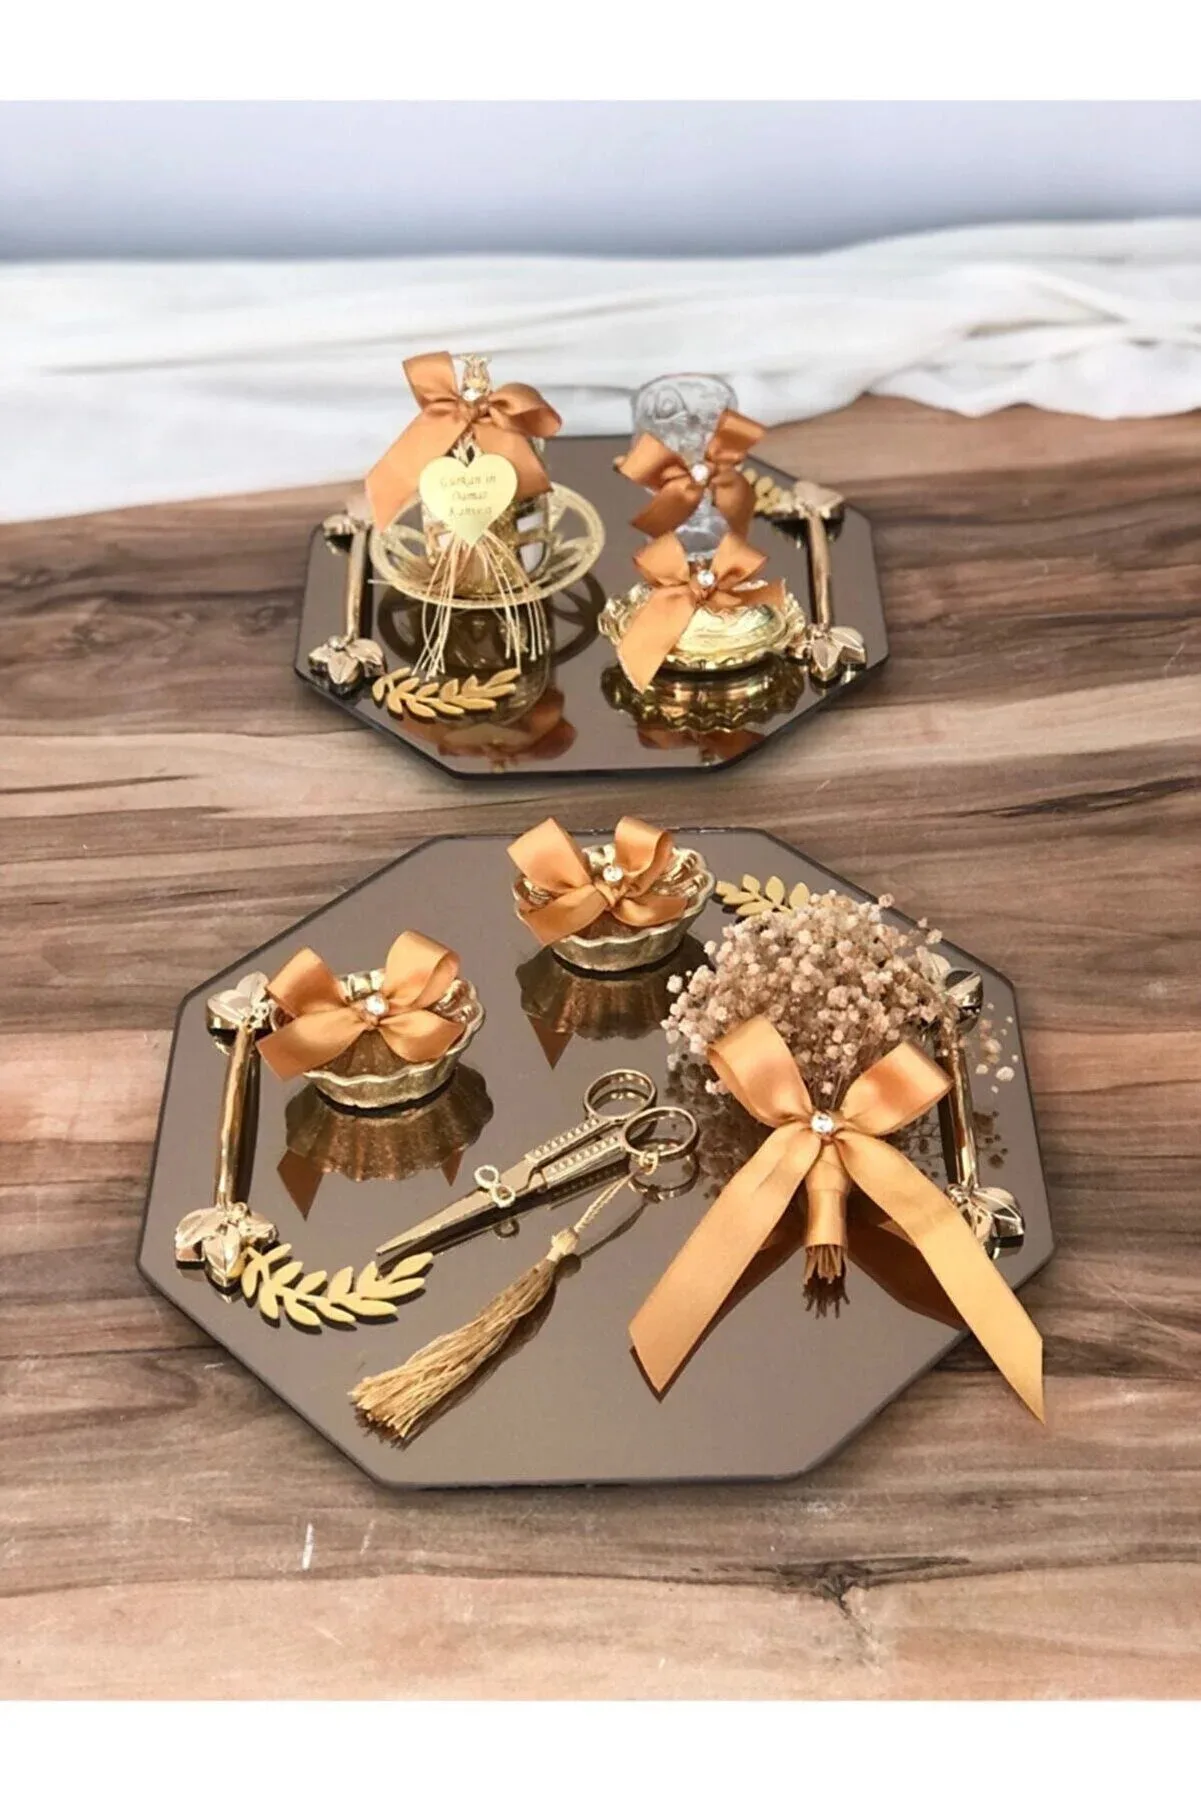 concept-promise-tray-engagement-tray-ring-tray-groom-tray-damat-cup-prompt-cup